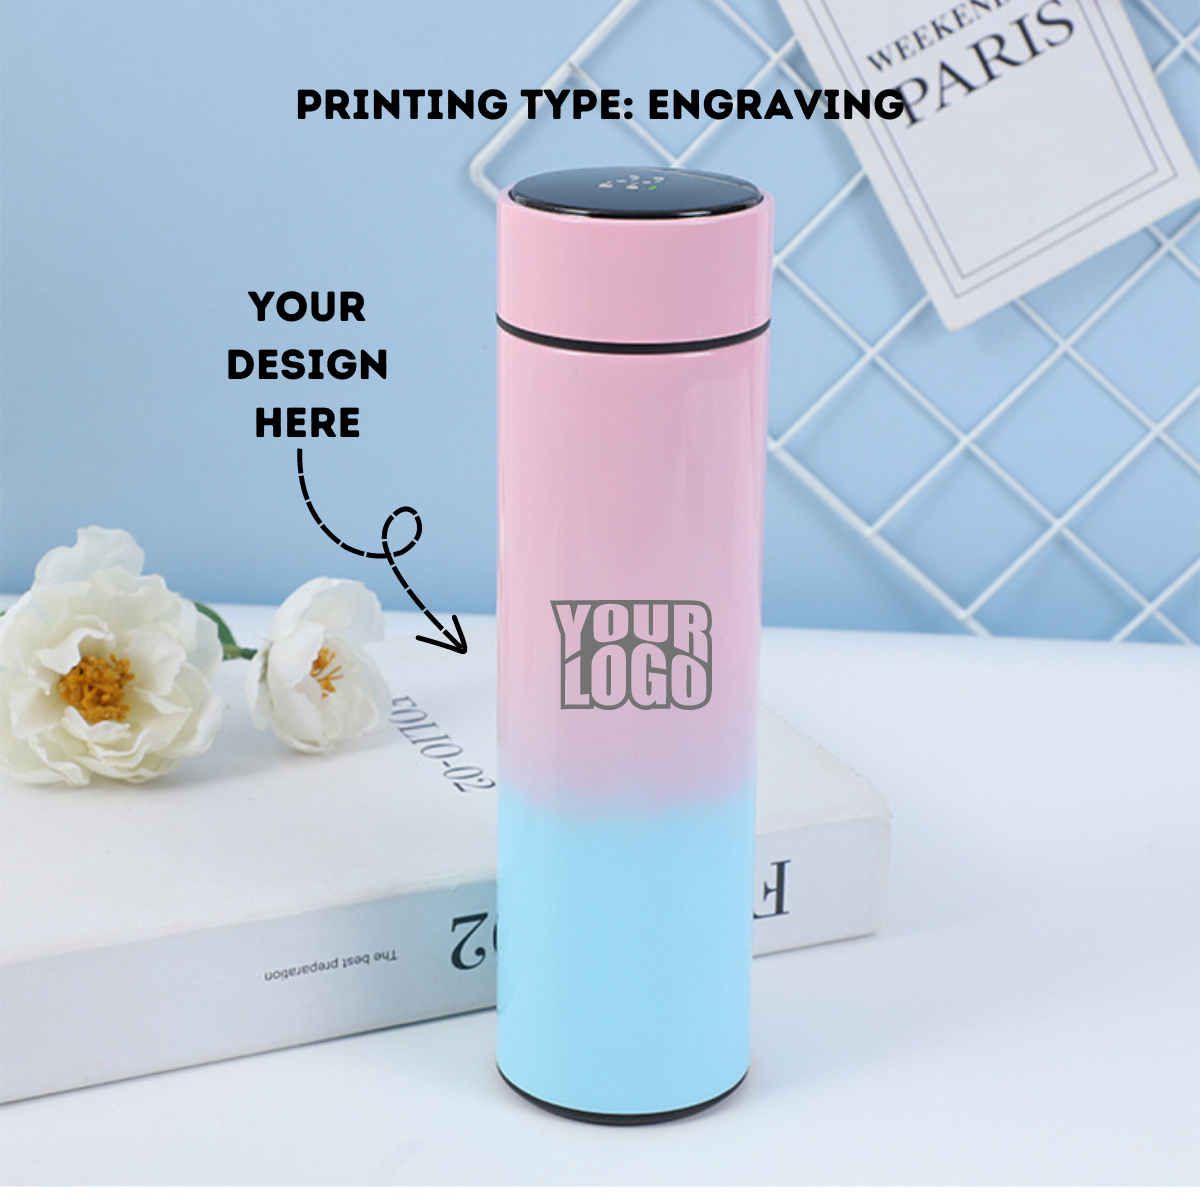 Personalized Dual Tone Temperature Water Bottle - Laser Engraved - For Return Gift, Corporate Gifting, Office or Personal Use